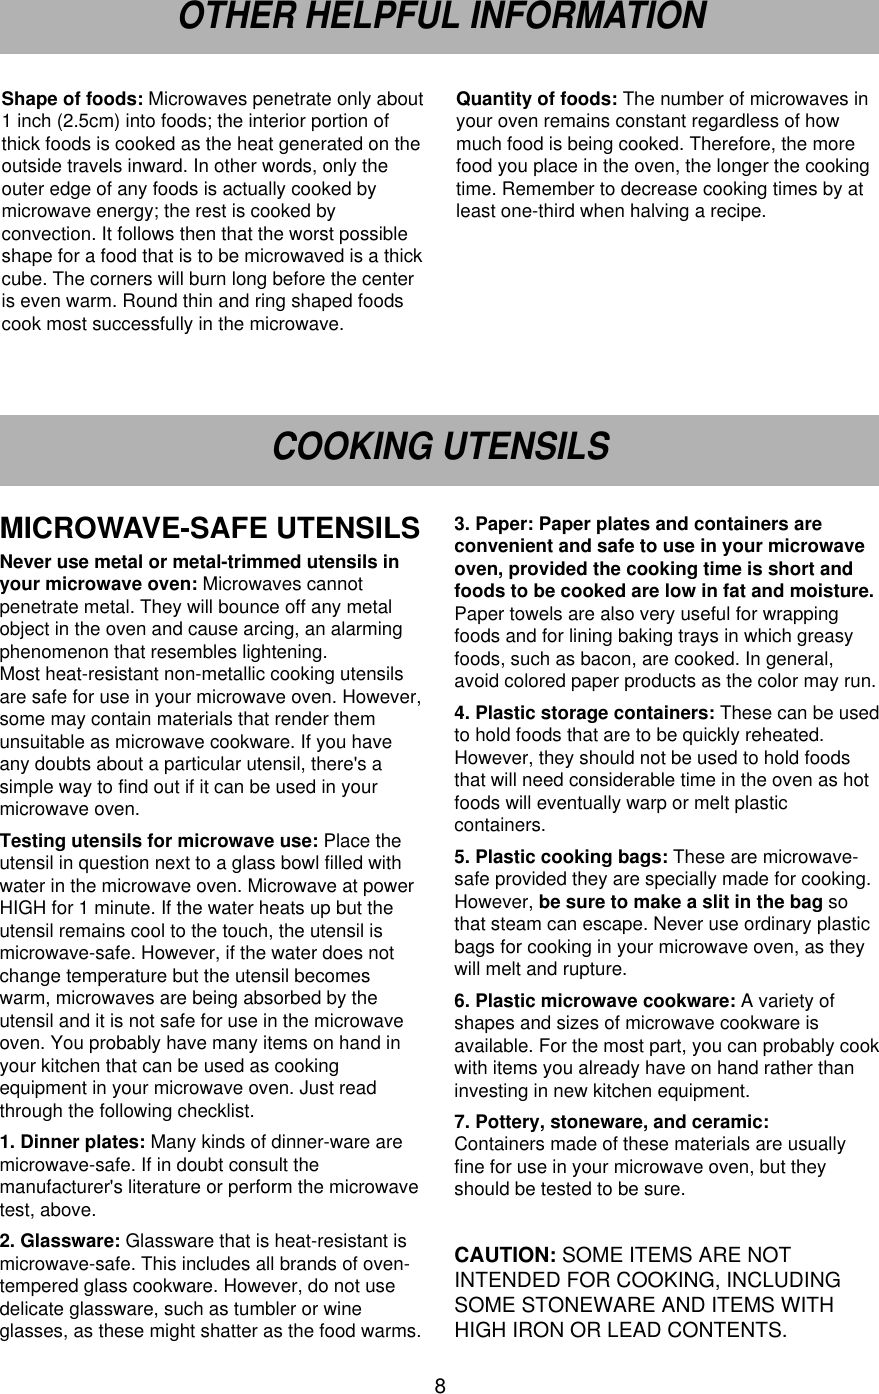 8OTHER HELPFUL INFORMATIONCOOKING UTENSILSShape of foods: Microwaves penetrate only about1 inch (2.5cm) into foods; the interior portion ofthick foods is cooked as the heat generated on theoutside travels inward. In other words, only theouter edge of any foods is actually cooked bymicrowave energy; the rest is cooked byconvection. It follows then that the worst possibleshape for a food that is to be microwaved is a thickcube. The corners will burn long before the centeris even warm. Round thin and ring shaped foodscook most successfully in the microwave.Quantity of foods: The number of microwaves inyour oven remains constant regardless of howmuch food is being cooked. Therefore, the morefood you place in the oven, the longer the cookingtime. Remember to decrease cooking times by atleast one-third when halving a recipe. MICROWAVE-SAFE UTENSILS Never use metal or metal-trimmed utensils inyour microwave oven: Microwaves cannotpenetrate metal. They will bounce off any metalobject in the oven and cause arcing, an alarmingphenomenon that resembles lightening. Most heat-resistant non-metallic cooking utensilsare safe for use in your microwave oven. However,some may contain materials that render themunsuitable as microwave cookware. If you haveany doubts about a particular utensil, there&apos;s asimple way to find out if it can be used in yourmicrowave oven.Testing utensils for microwave use: Place theutensil in question next to a glass bowl filled withwater in the microwave oven. Microwave at powerHIGH for 1 minute. If the water heats up but theutensil remains cool to the touch, the utensil ismicrowave-safe. However, if the water does notchange temperature but the utensil becomeswarm, microwaves are being absorbed by theutensil and it is not safe for use in the microwaveoven. You probably have many items on hand inyour kitchen that can be used as cookingequipment in your microwave oven. Just readthrough the following checklist.1. Dinner plates: Many kinds of dinner-ware aremicrowave-safe. If in doubt consult themanufacturer&apos;s literature or perform the microwavetest, above.2. Glassware: Glassware that is heat-resistant ismicrowave-safe. This includes all brands of oven-tempered glass cookware. However, do not usedelicate glassware, such as tumbler or wineglasses, as these might shatter as the food warms.3. Paper: Paper plates and containers areconvenient and safe to use in your microwaveoven, provided the cooking time is short andfoods to be cooked are low in fat and moisture.Paper towels are also very useful for wrappingfoods and for lining baking trays in which greasyfoods, such as bacon, are cooked. In general,avoid colored paper products as the color may run. 4. Plastic storage containers: These can be usedto hold foods that are to be quickly reheated.However, they should not be used to hold foodsthat will need considerable time in the oven as hotfoods will eventually warp or melt plasticcontainers.5. Plastic cooking bags: These are microwave-safe provided they are specially made for cooking.However, be sure to make a slit in the bag sothat steam can escape. Never use ordinary plasticbags for cooking in your microwave oven, as theywill melt and rupture.6. Plastic microwave cookware: A variety ofshapes and sizes of microwave cookware isavailable. For the most part, you can probably cookwith items you already have on hand rather thaninvesting in new kitchen equipment.7. Pottery, stoneware, and ceramic:Containers made of these materials are usuallyfine for use in your microwave oven, but theyshould be tested to be sure.CAUTION: SOME ITEMS ARE NOTINTENDED FOR COOKING, INCLUDINGSOME STONEWARE AND ITEMS WITHHIGH IRON OR LEAD CONTENTS.